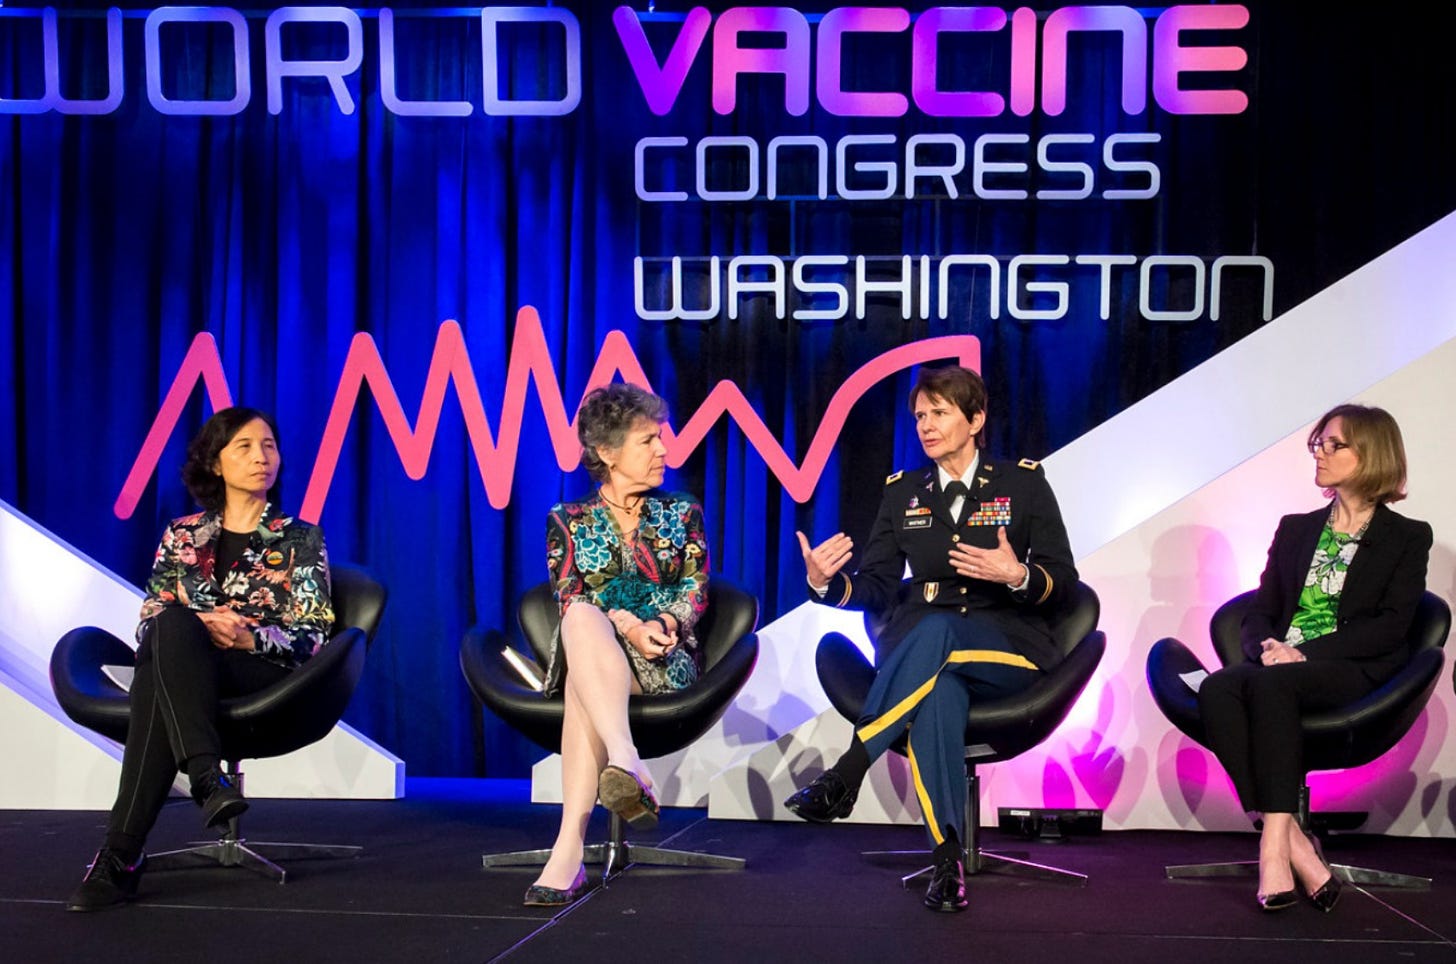 What The Vaccine Industry Says Behind Closed Doors About Vaccines Https%3A%2F%2Fsubstack-post-media.s3.amazonaws.com%2Fpublic%2Fimages%2F539c42d5-2607-46a2-a985-04632fa265b5_1692x1120